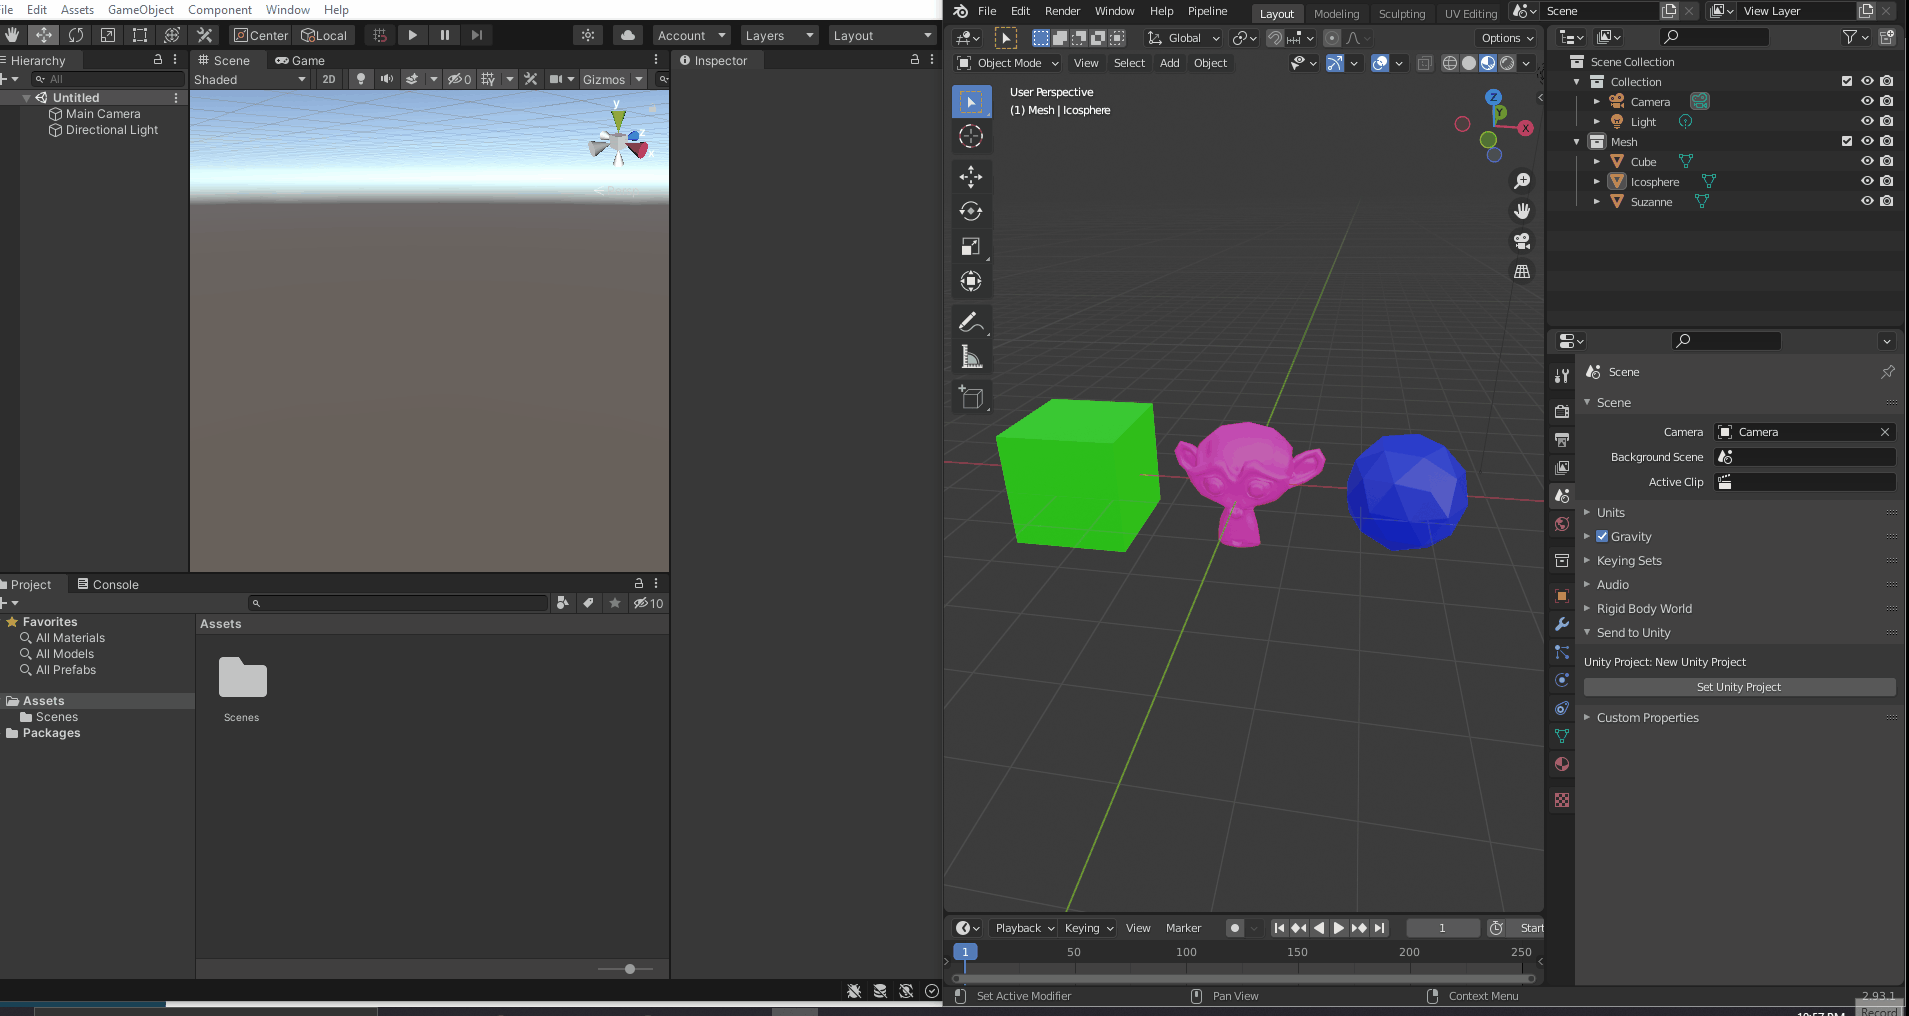 Be able to quickly import FBX files from Blender to Unity through the Blender top bar menu.